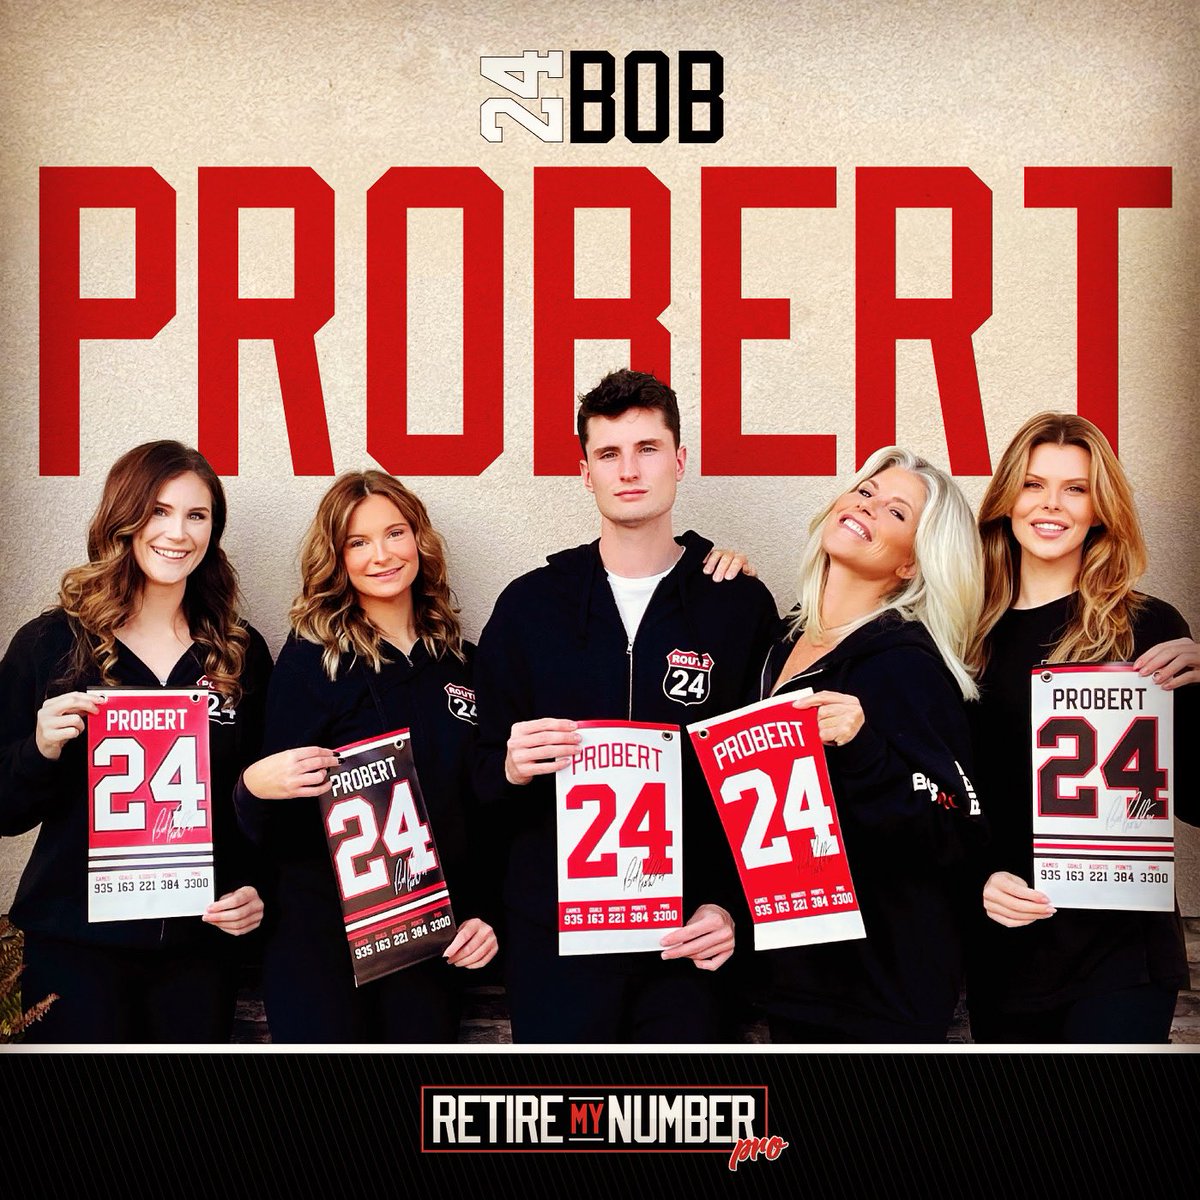 Can't wait until Ride Day to support - Bob Probert Ride